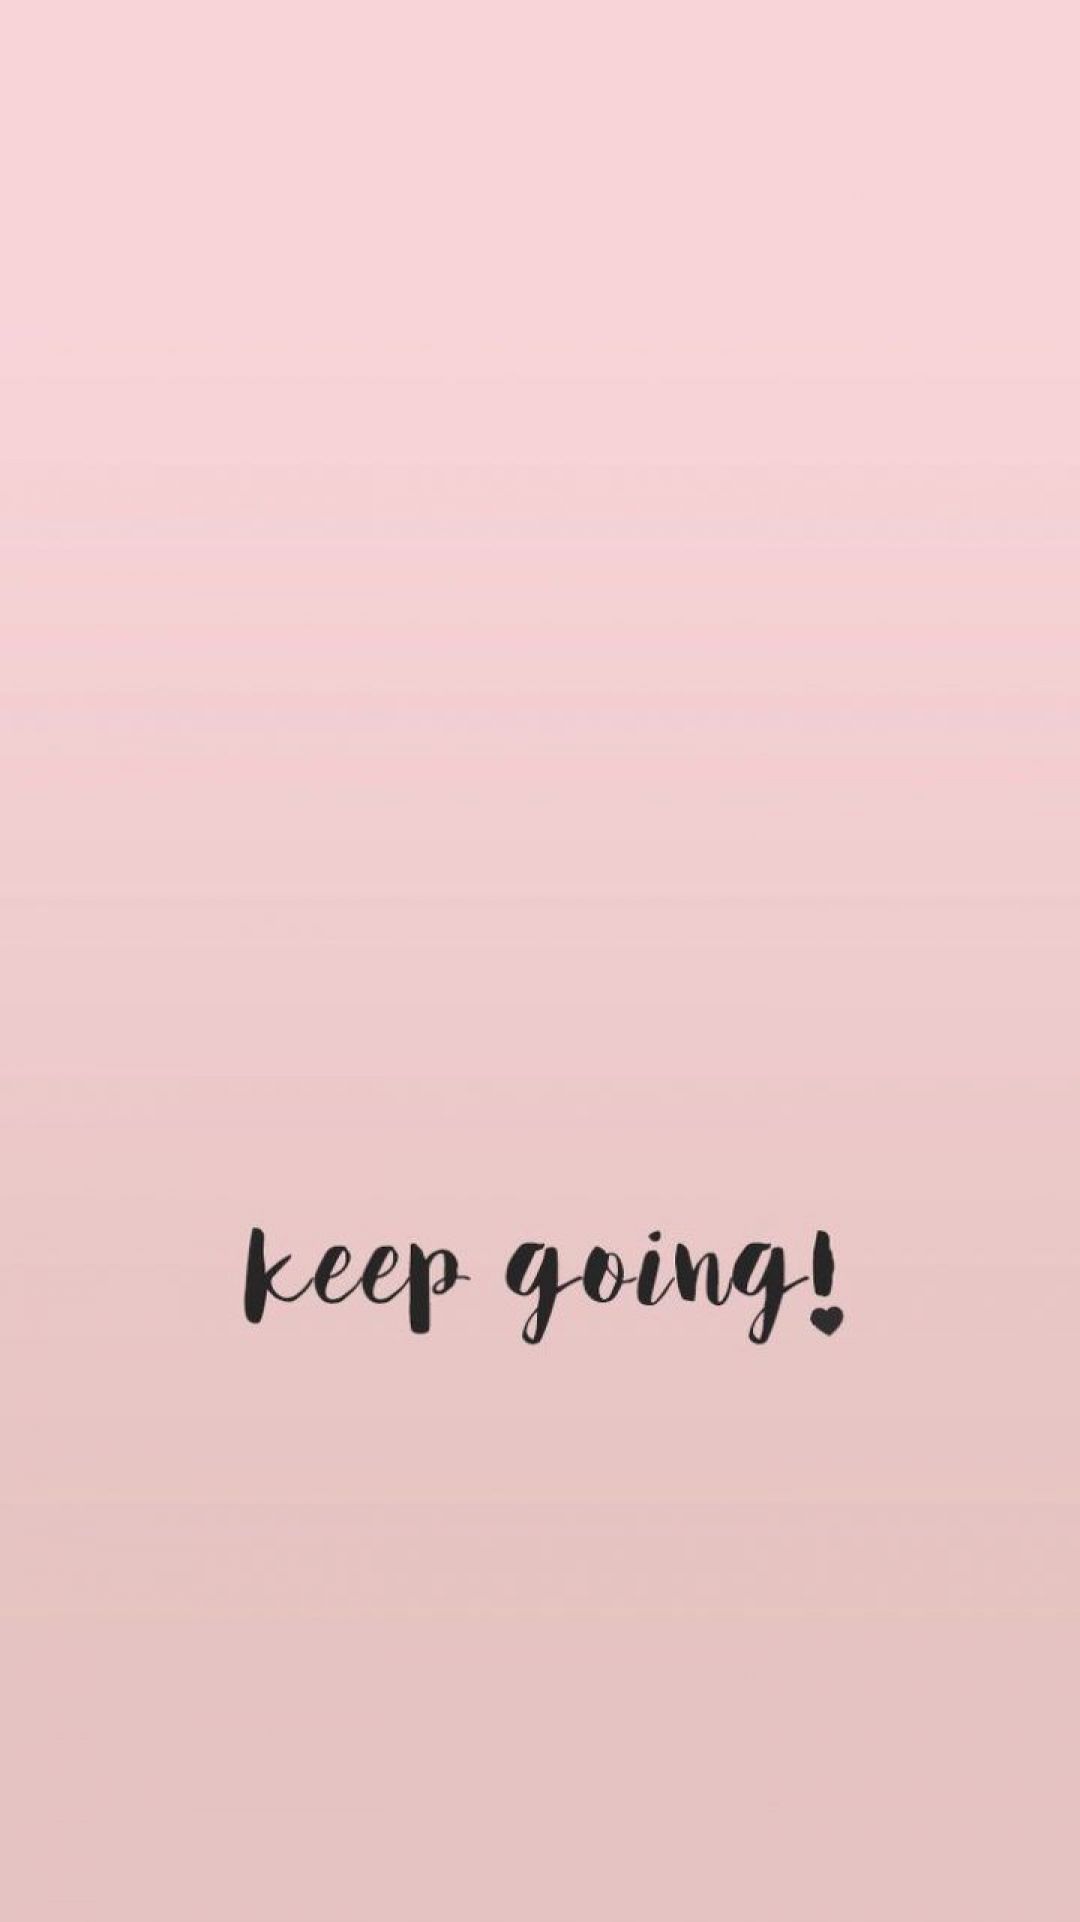 Motivation Aesthetic, iPhone, Desktop HD Background / Wallpaper (1080p, 4k) HD Wallpaper (Desktop Background / Android / iPhone) (1080p, 4k) (1080x1922)